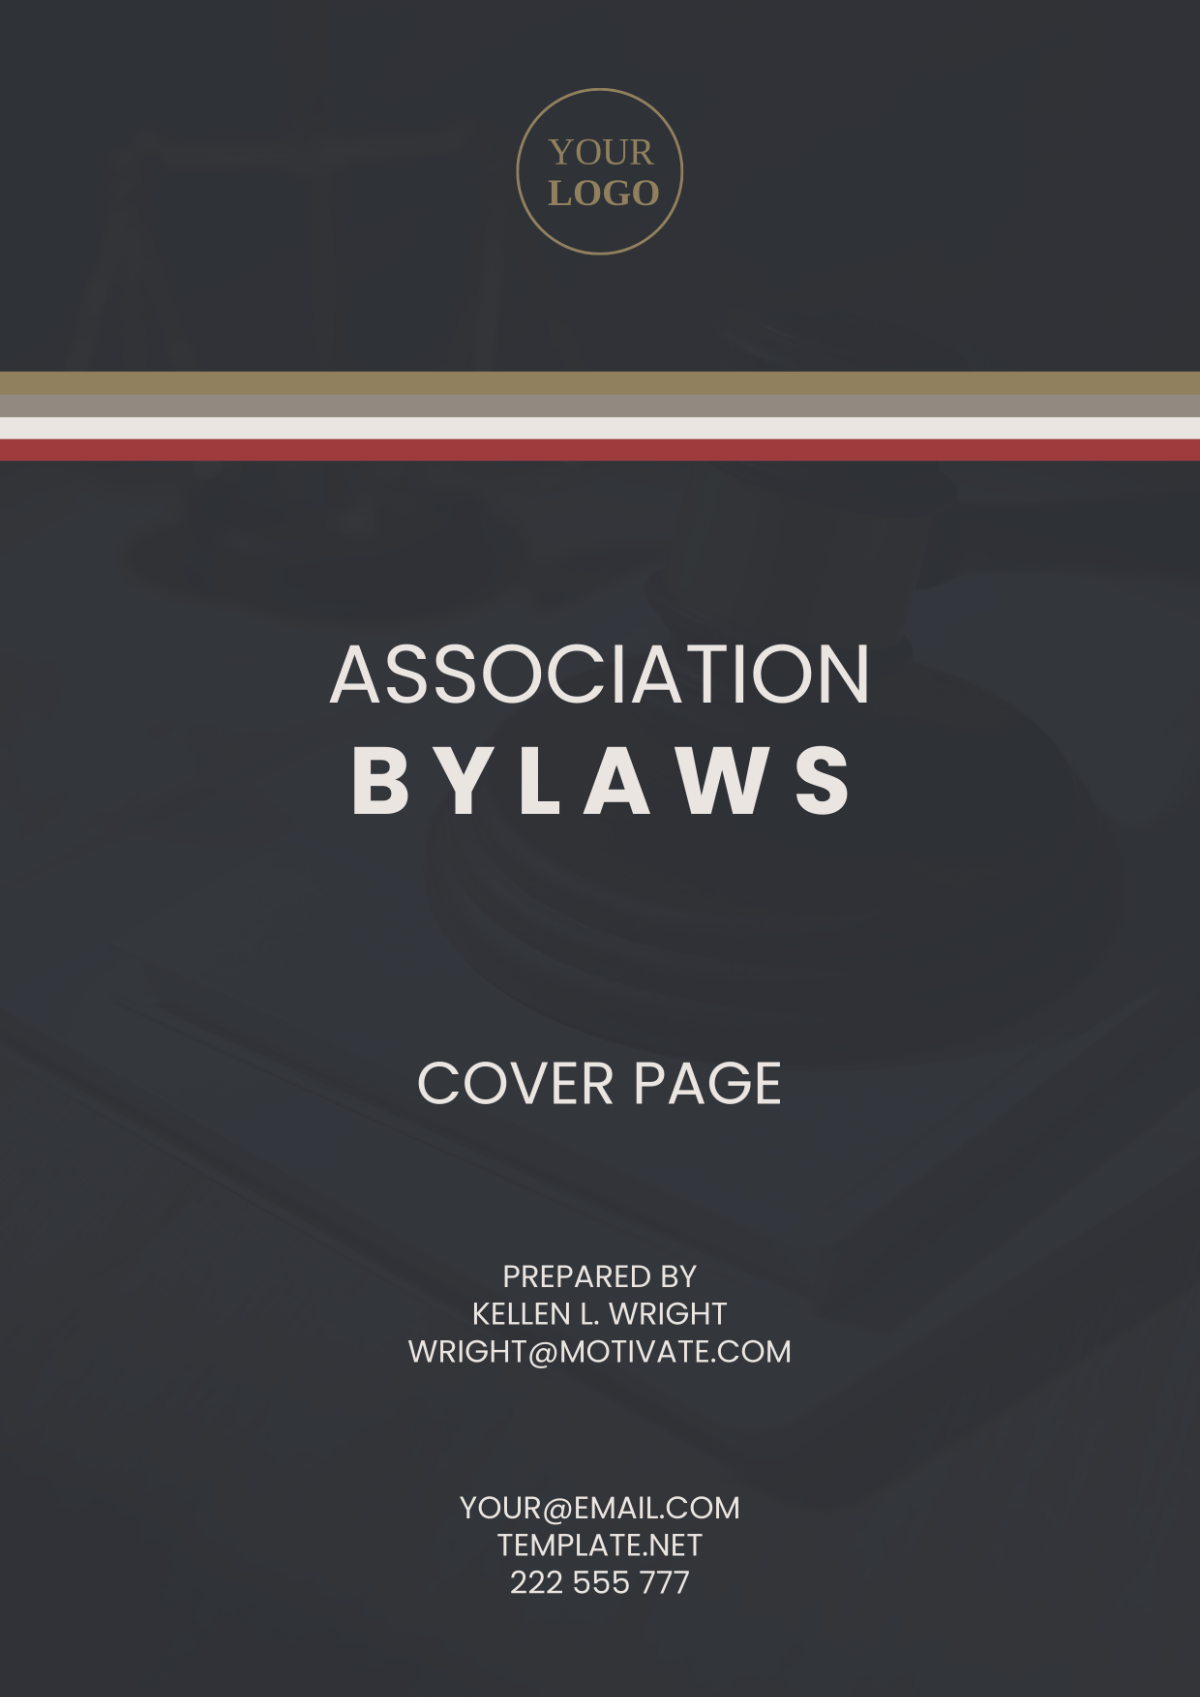 Free Association Bylaws Cover Page Template